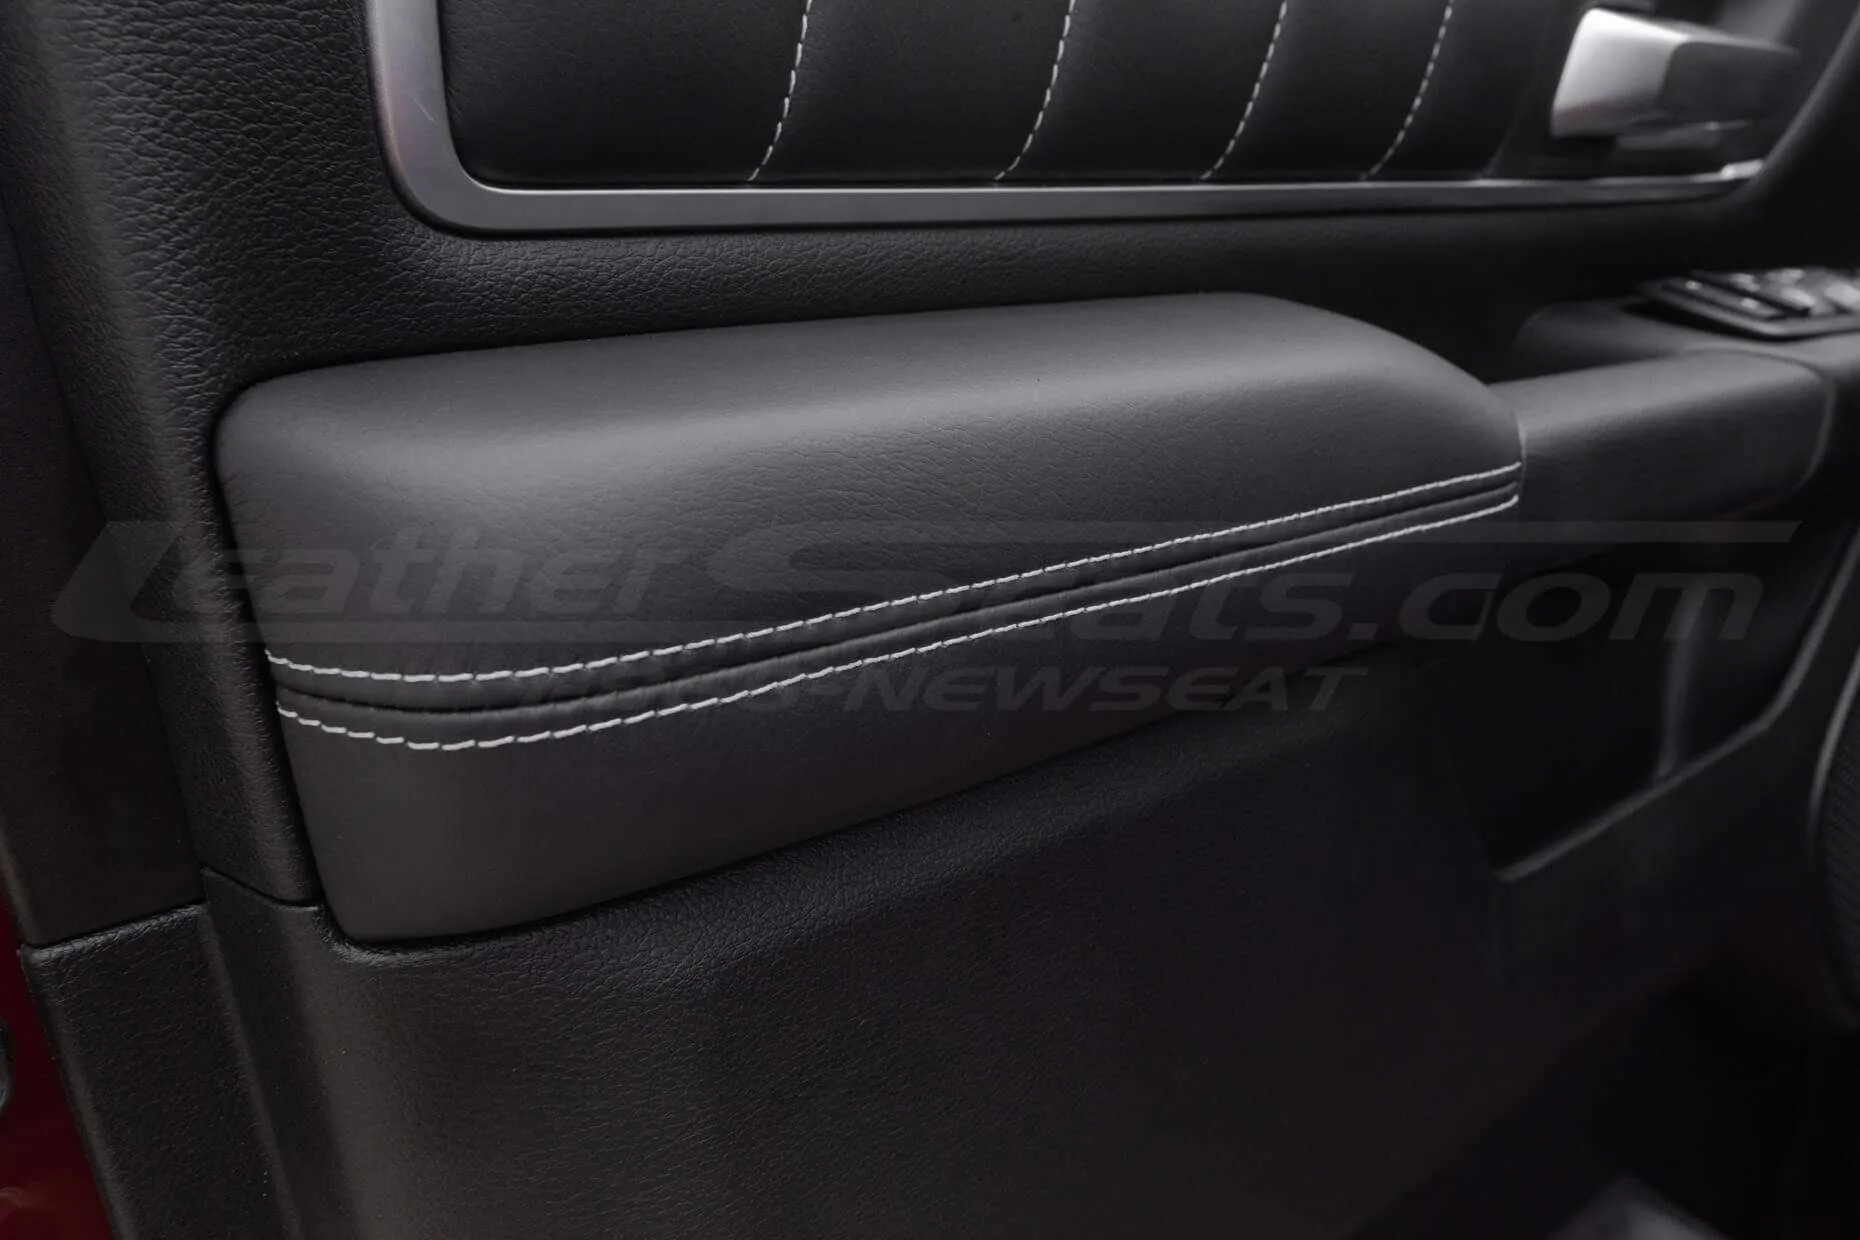 Black leather door armrest with ocntrasting white double-stitching